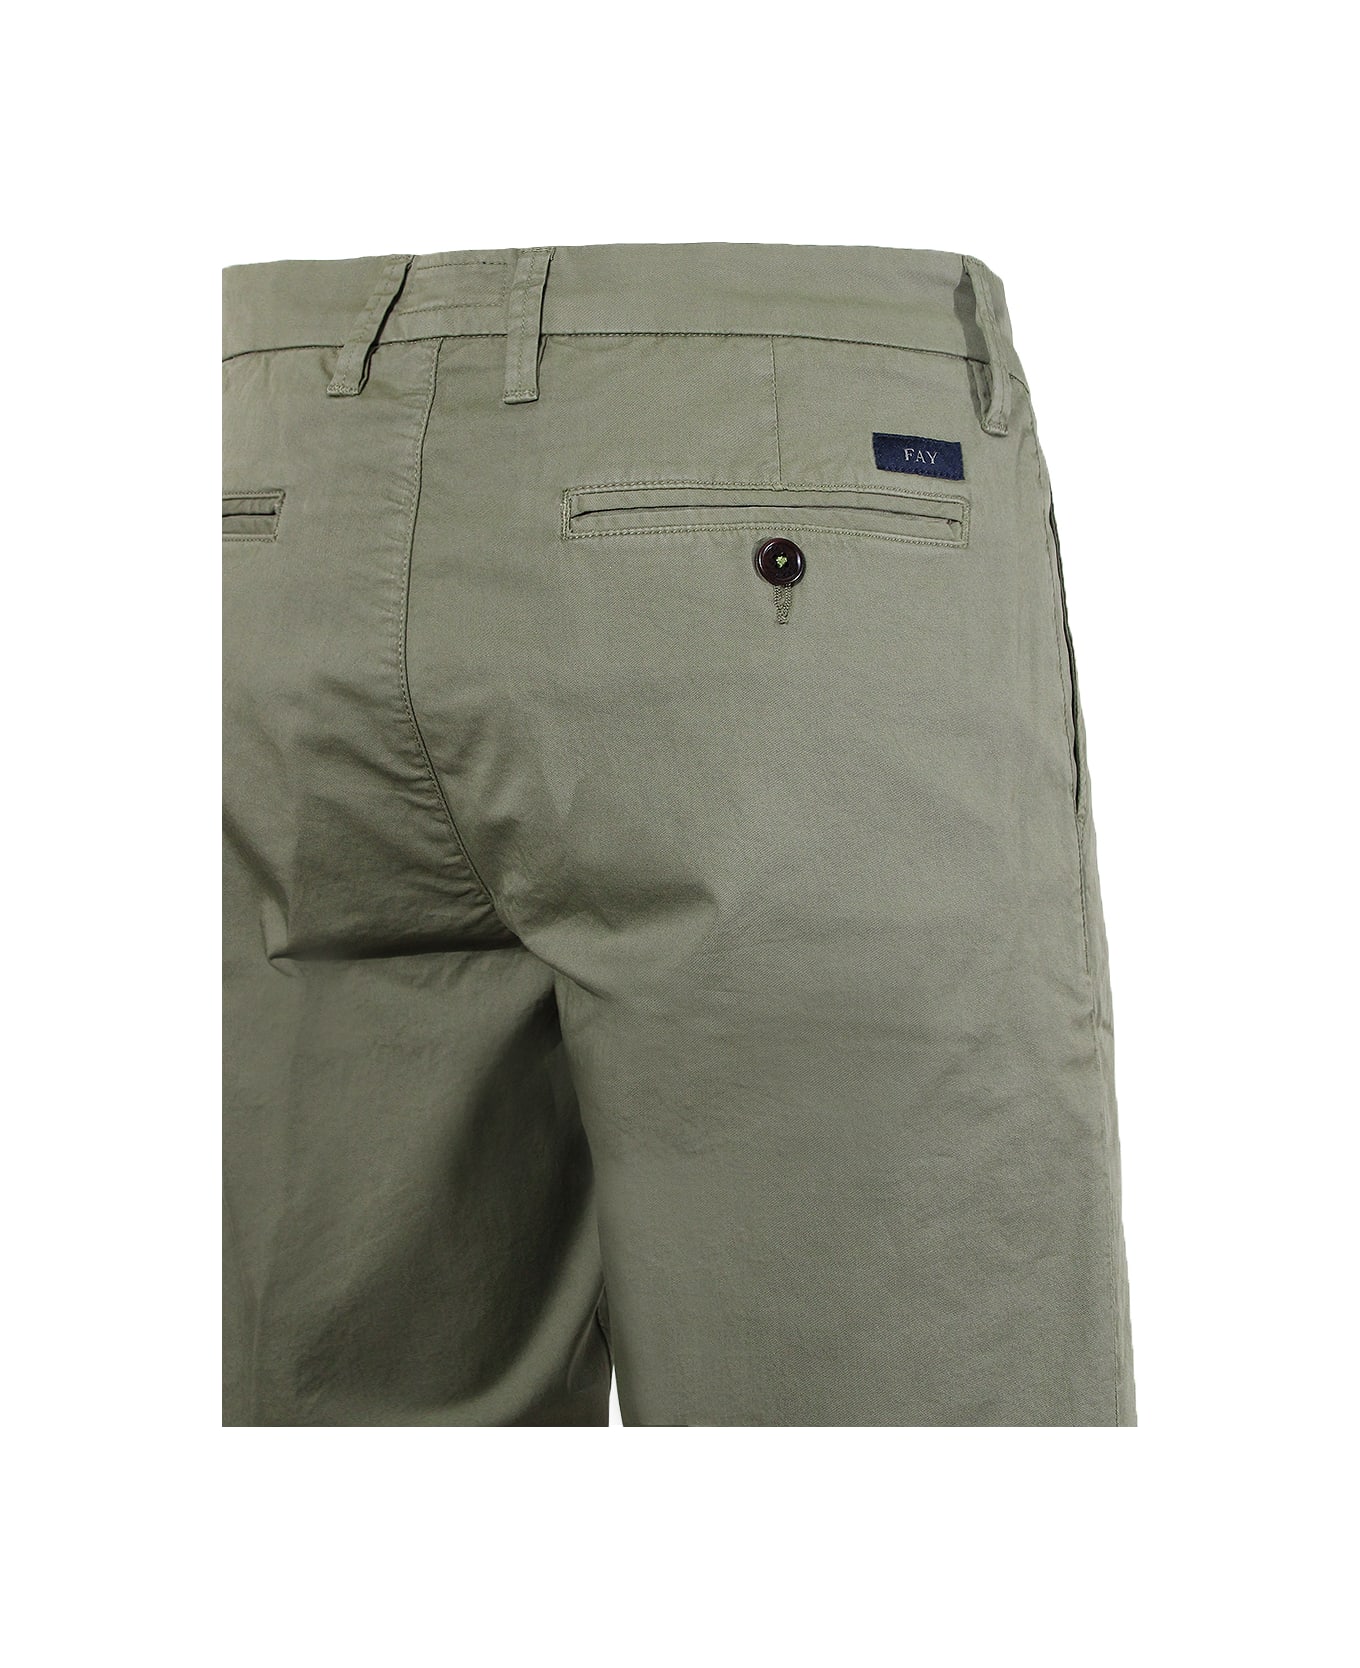 Fay Slim Fit Chino Shorts - Scout